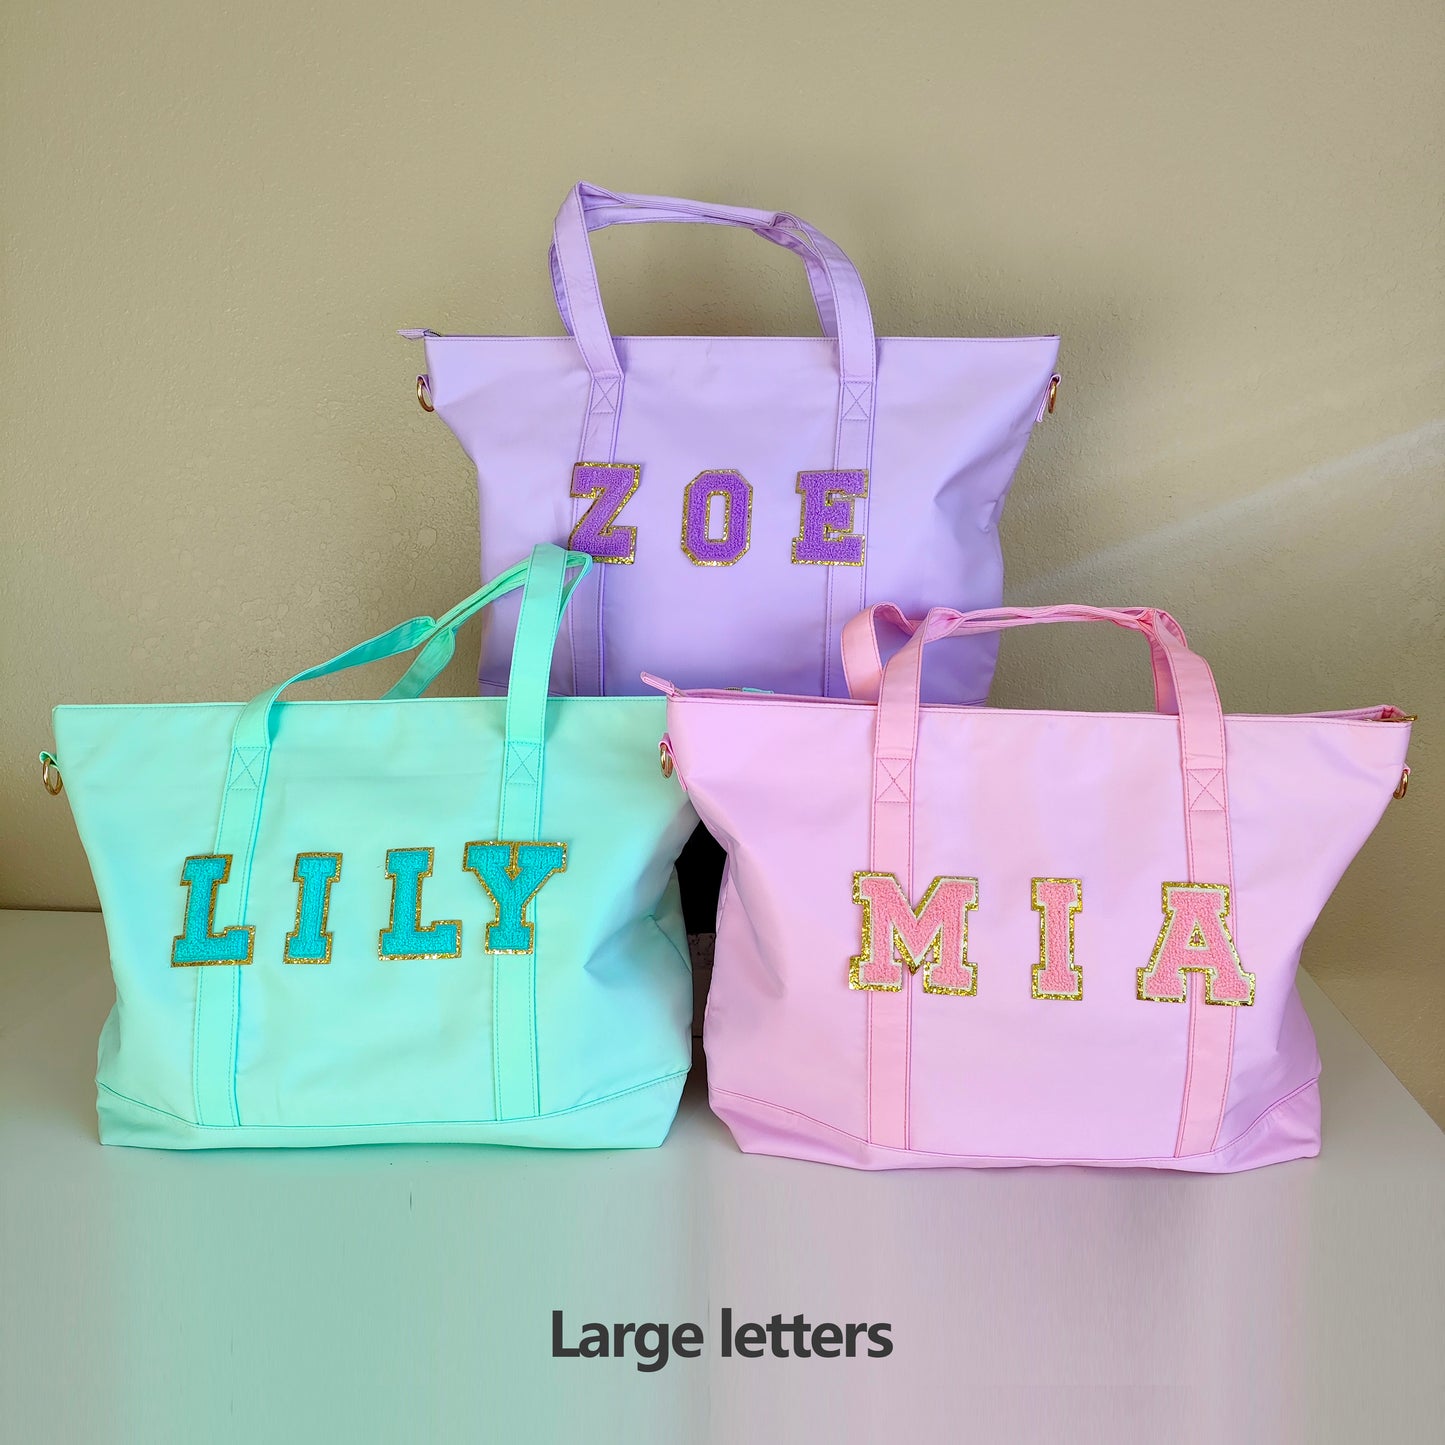 Sewn Patches Tote Bag Personalized Nylon Tote Bag Chenille Letter Patch Custom Overnight Weekend Travel Gym Bag Customizable